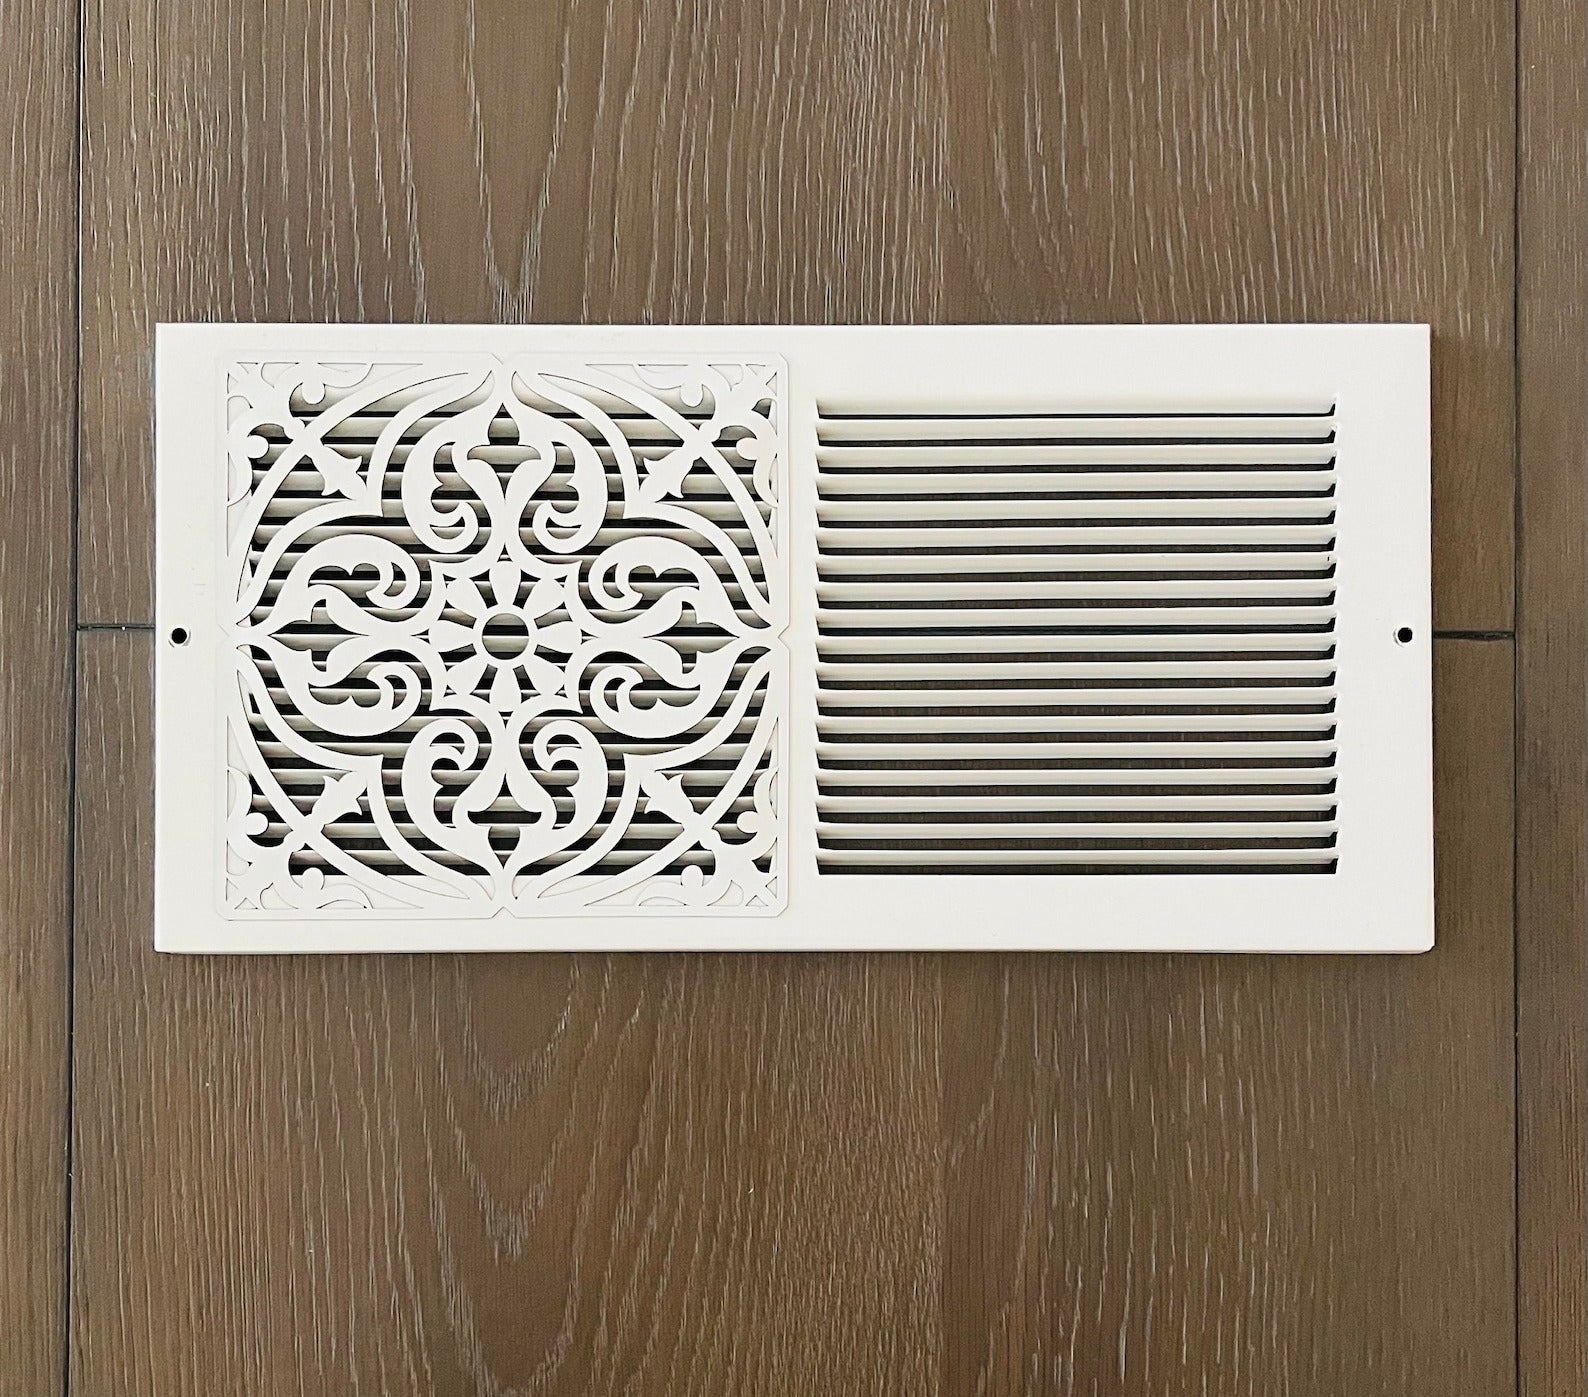 Decorative vent cover next to a standard one on wooden floor for comparison